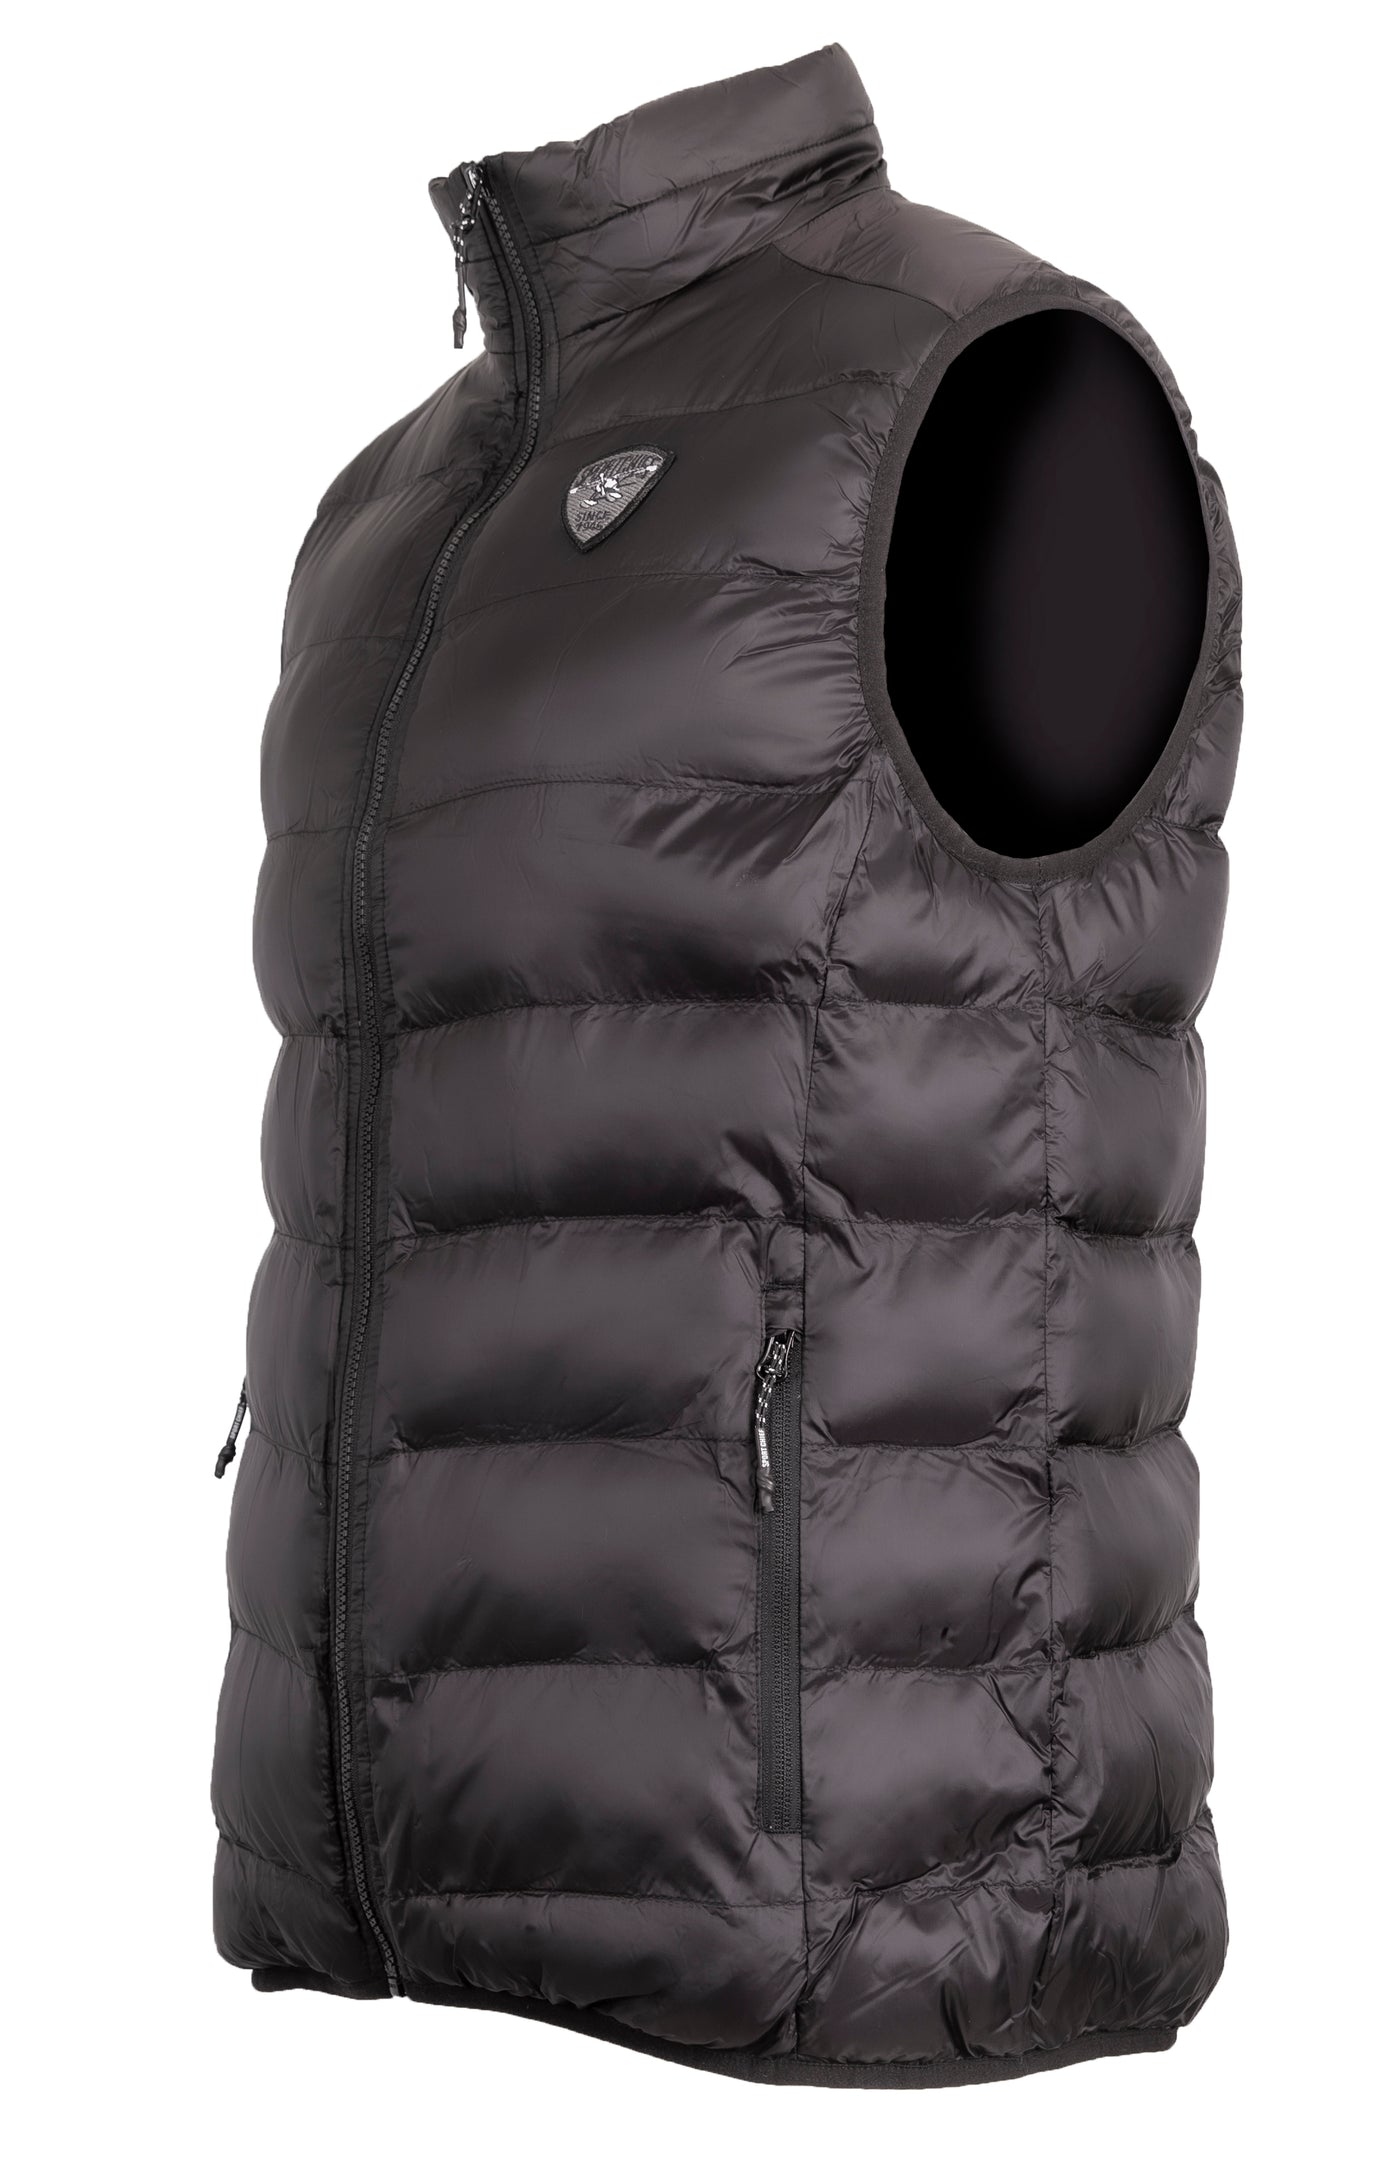 Men's heated sleeveless jacket with BlueTooth - SPORTCHIEF